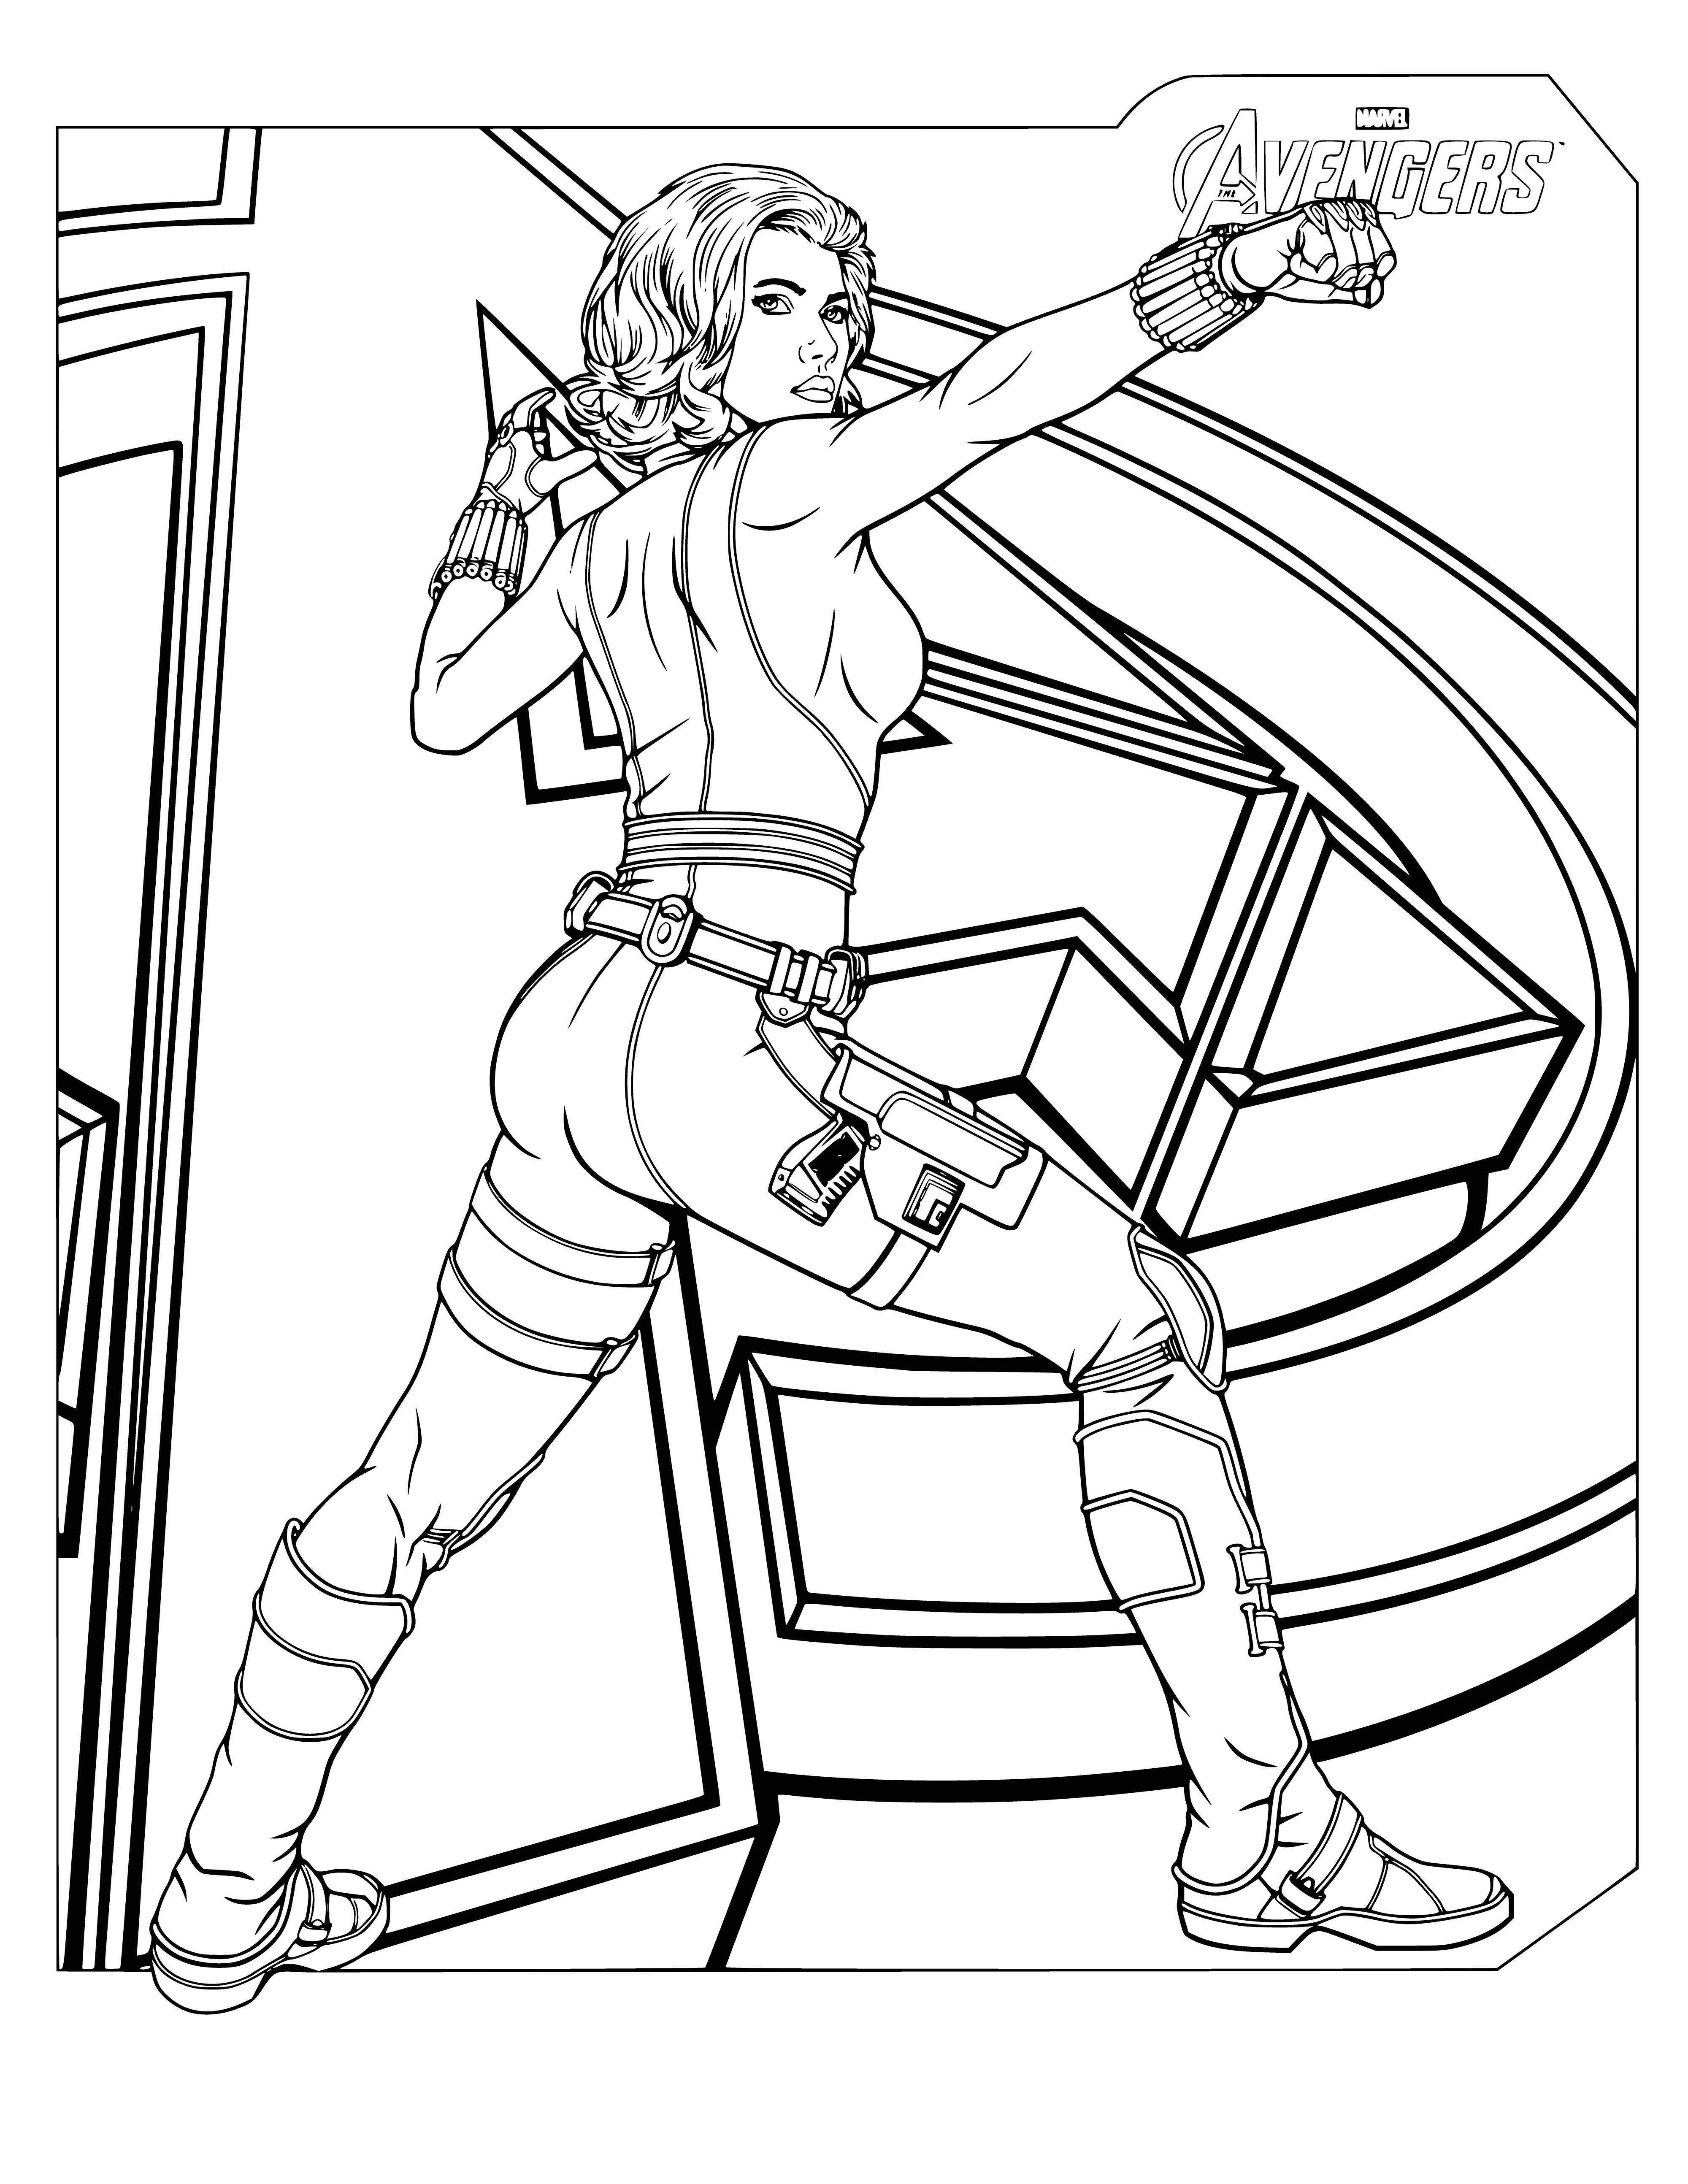 coloring page: Black Widow spider has a red hourglass on its abdomen & sits in center of web. #Avengers